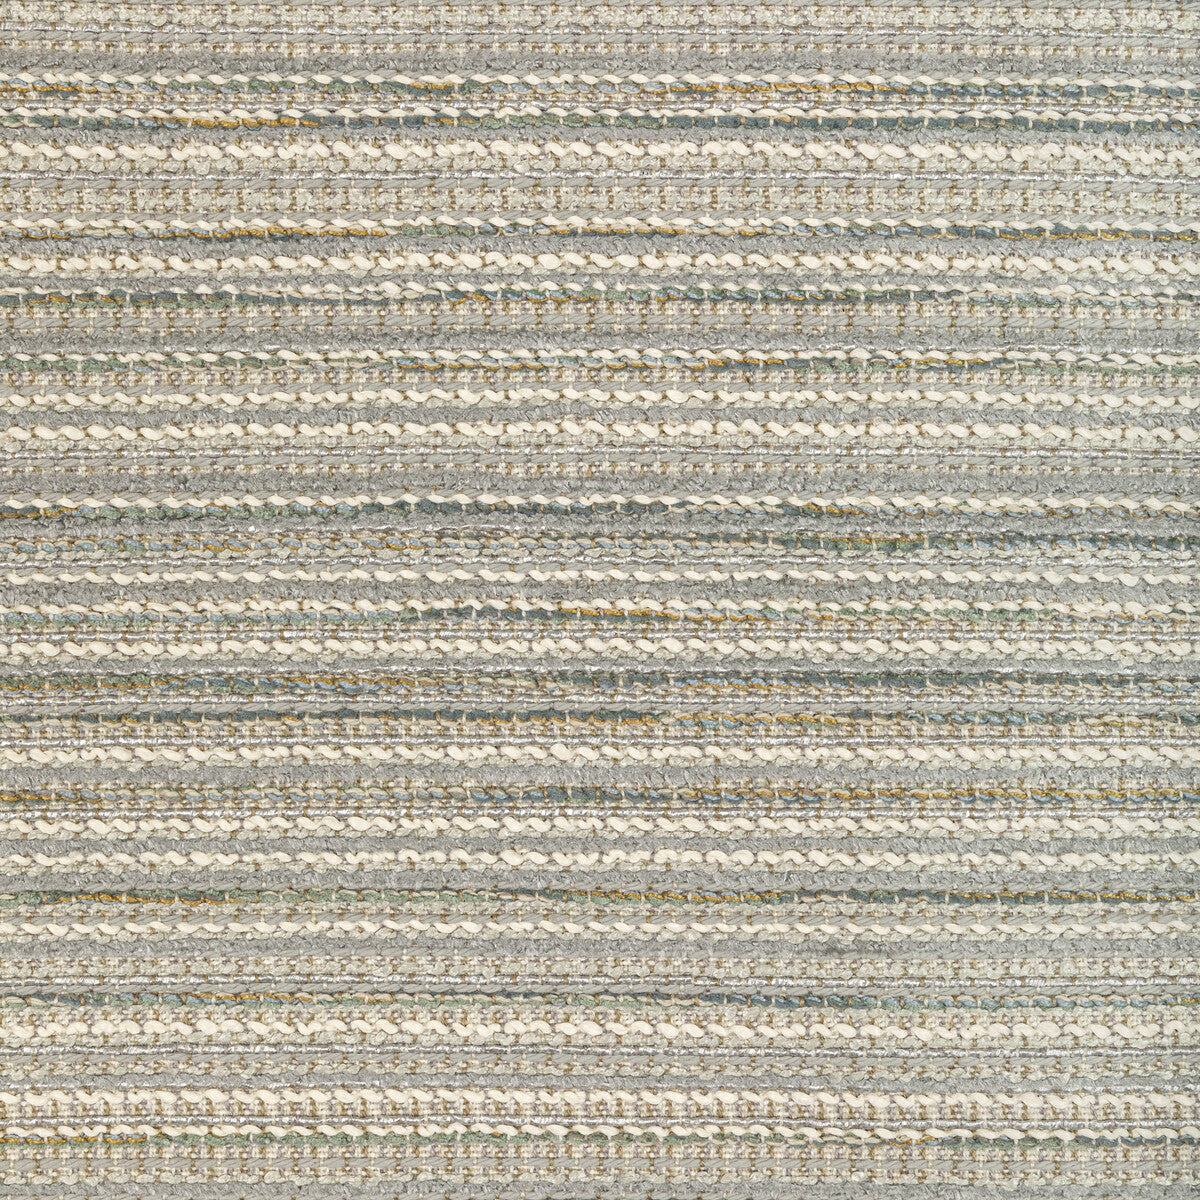 Kravet Couture fabric in 36611-411 color - pattern 36611.411.0 - by Kravet Couture in the Mabley Handler collection